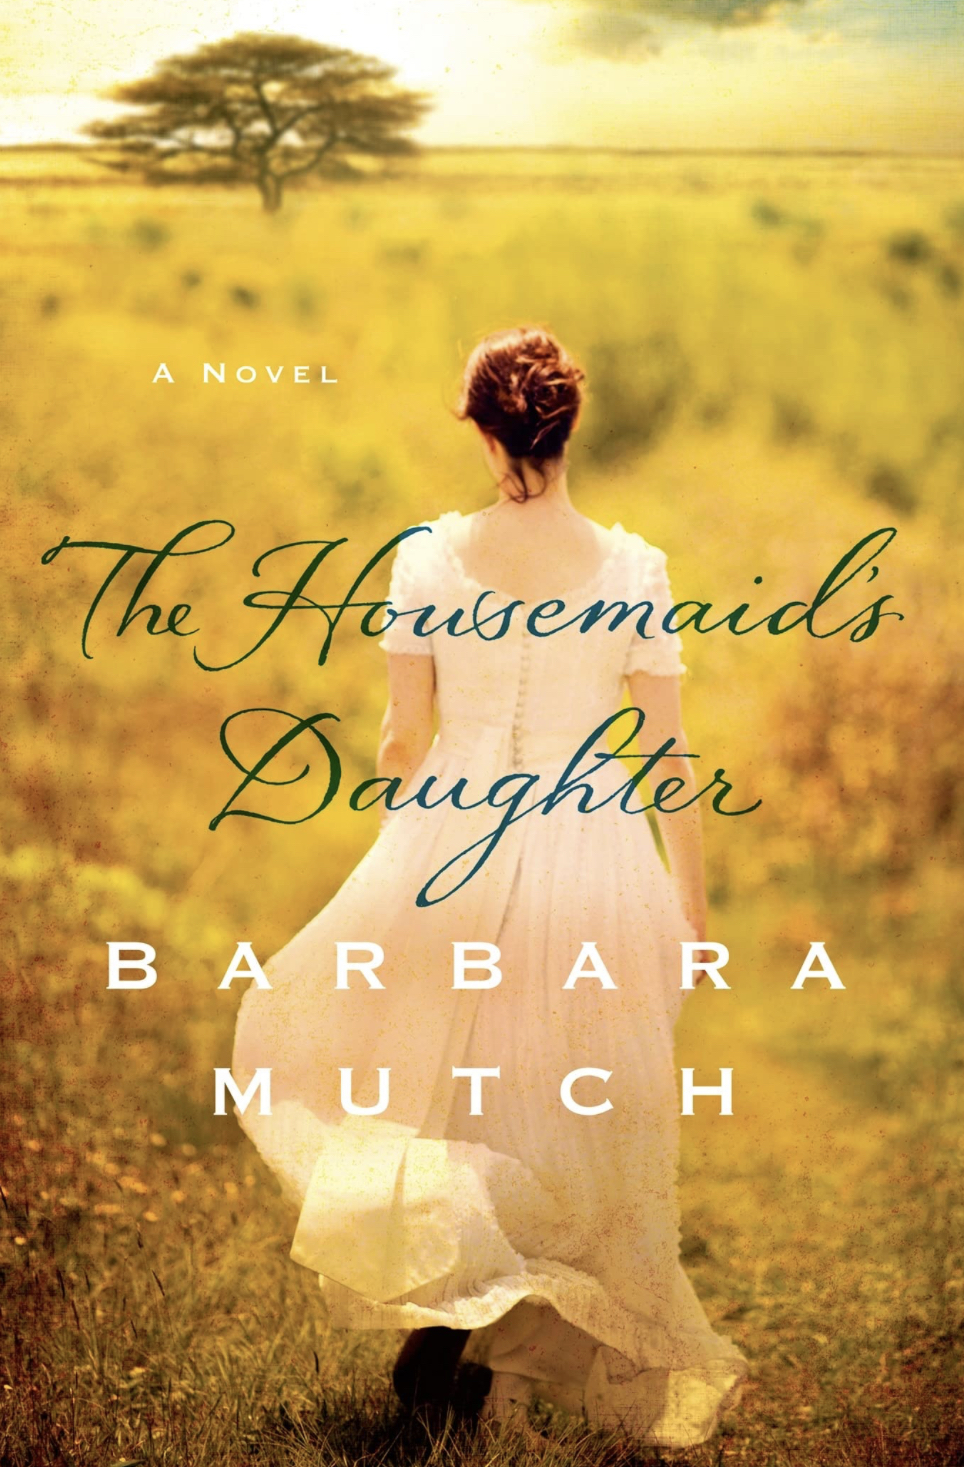 The Housemaid’s Daughter, by Barbara Mutch - A book about love and friendship in the South African desert